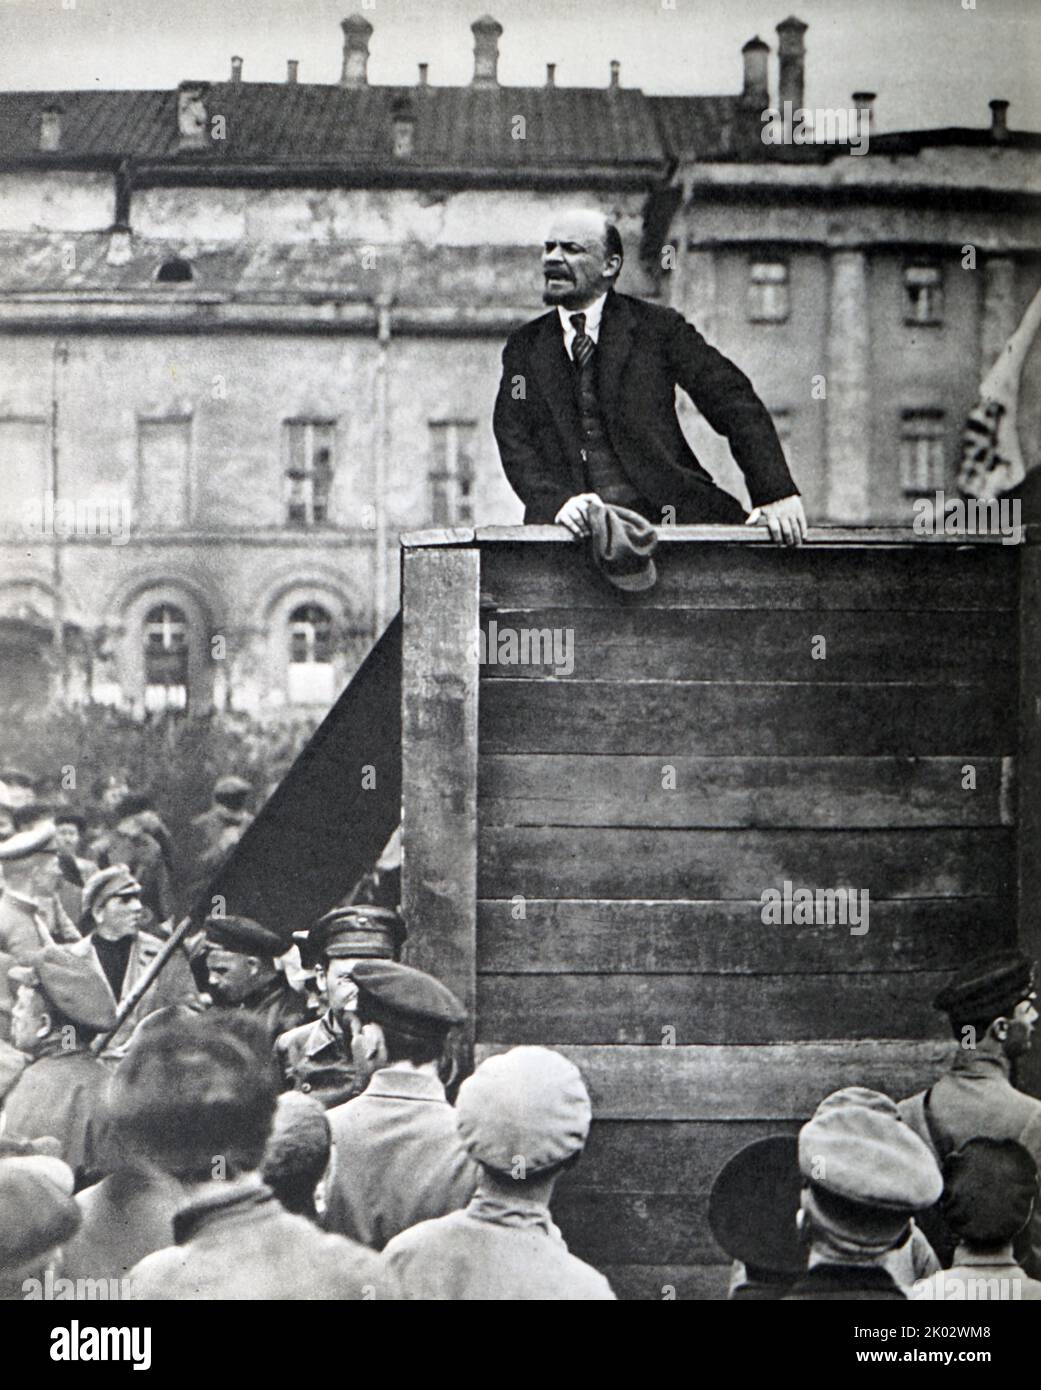 Vladimir Lenin delivers a speech at Sverdlov Square in front of troops leaving for the Polish front. Moscow, May 5, 1920. Photo by G. Goldstein. Stock Photo